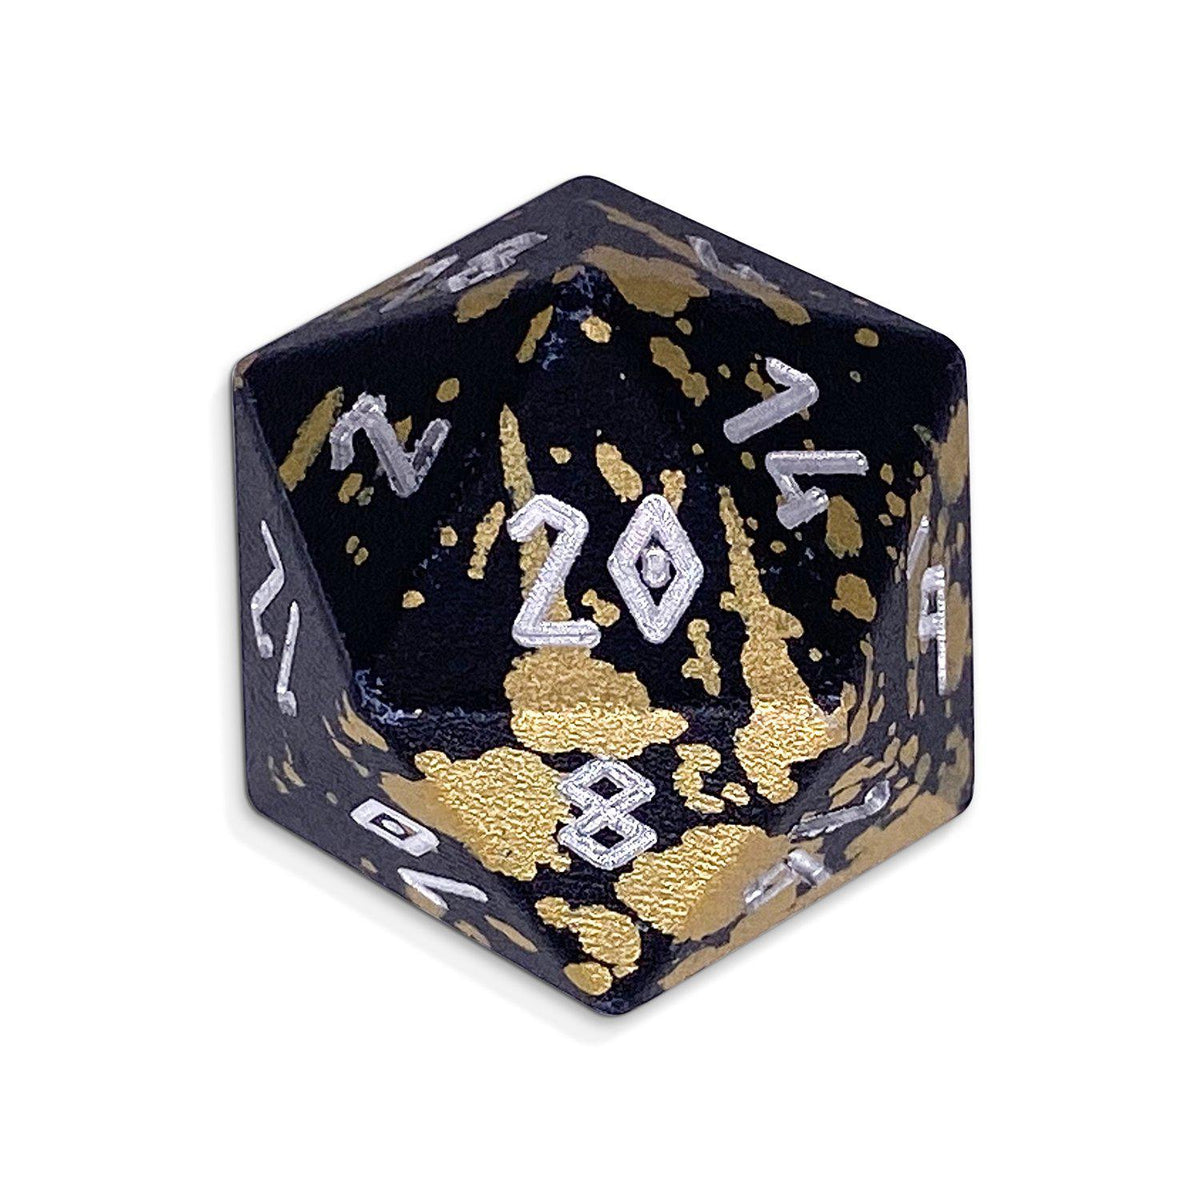 Single Wondrous Dice® D20 in Great Void by Norse Foundry 6063 Aircraft Grade Aluminum